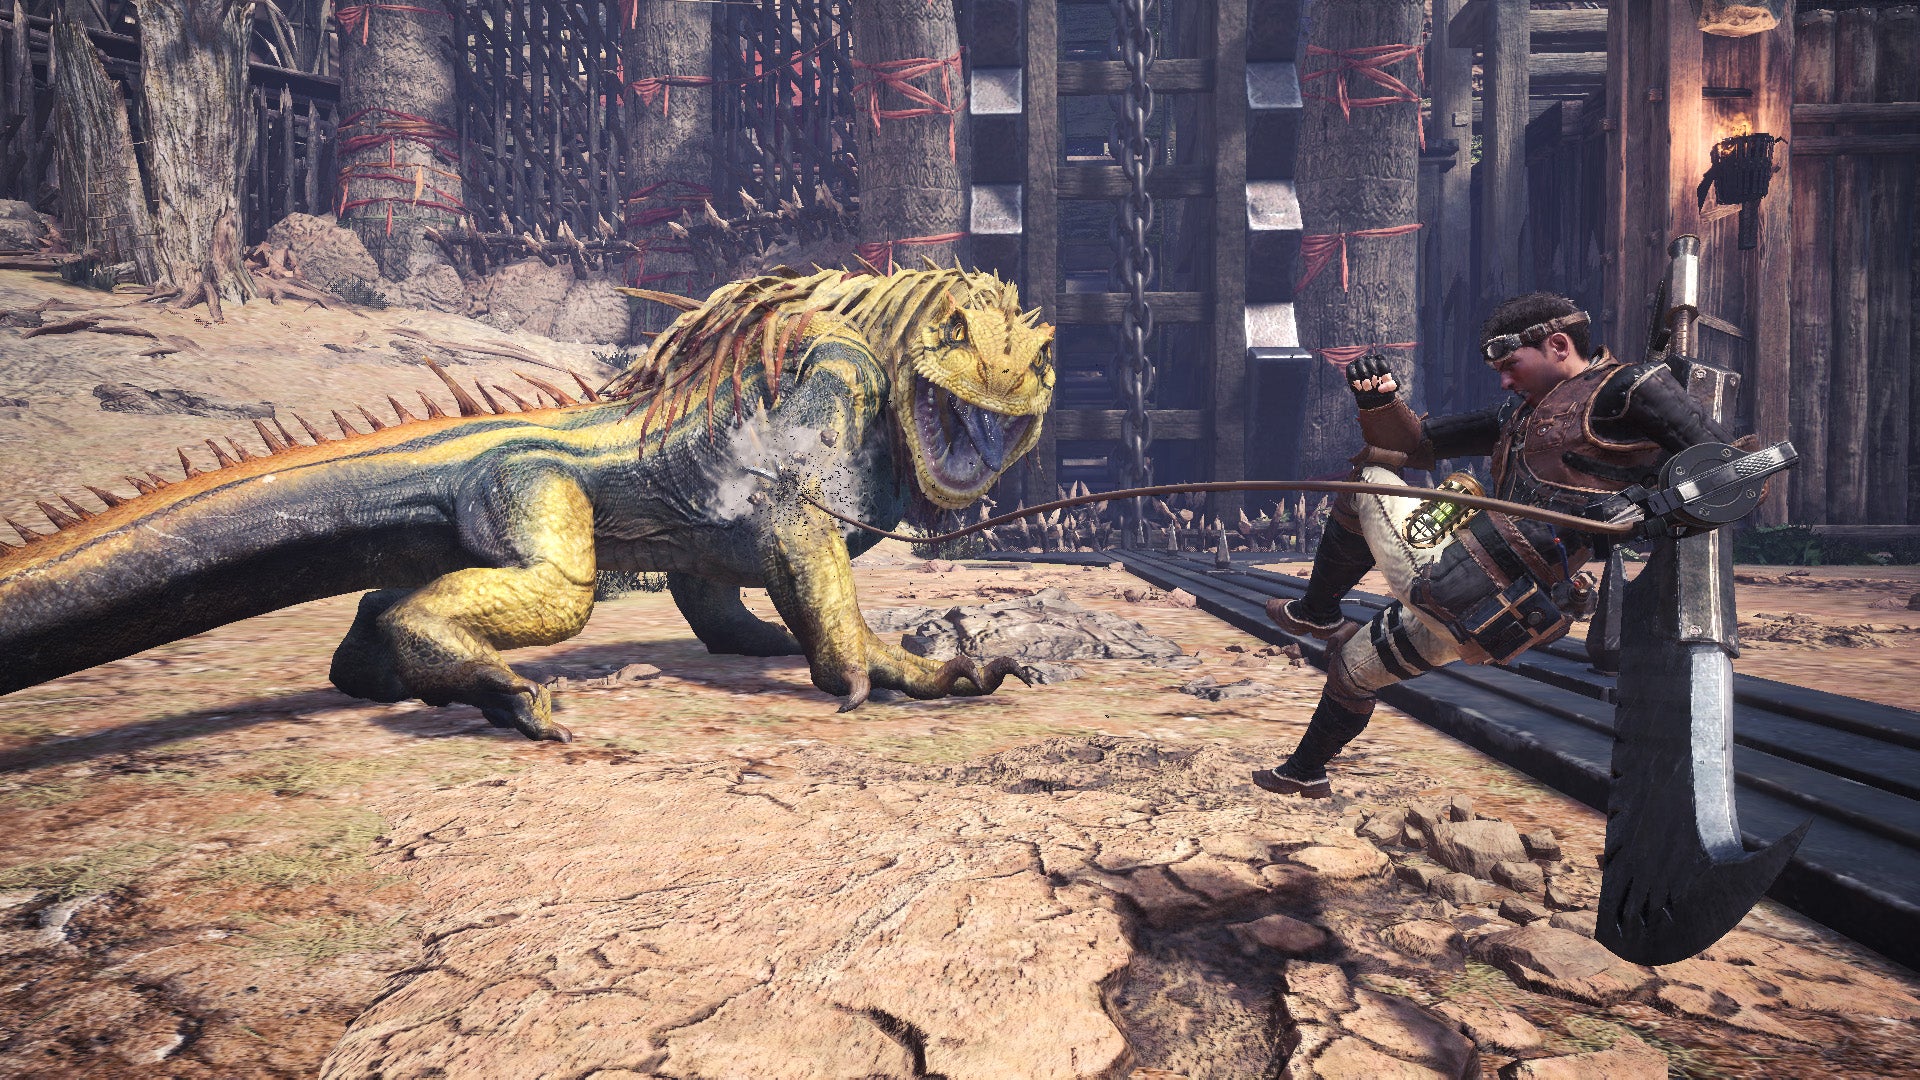 An image from Monster Hunter: World which shows the player grappling hook towards a huge Jagras (a yellow lizard).